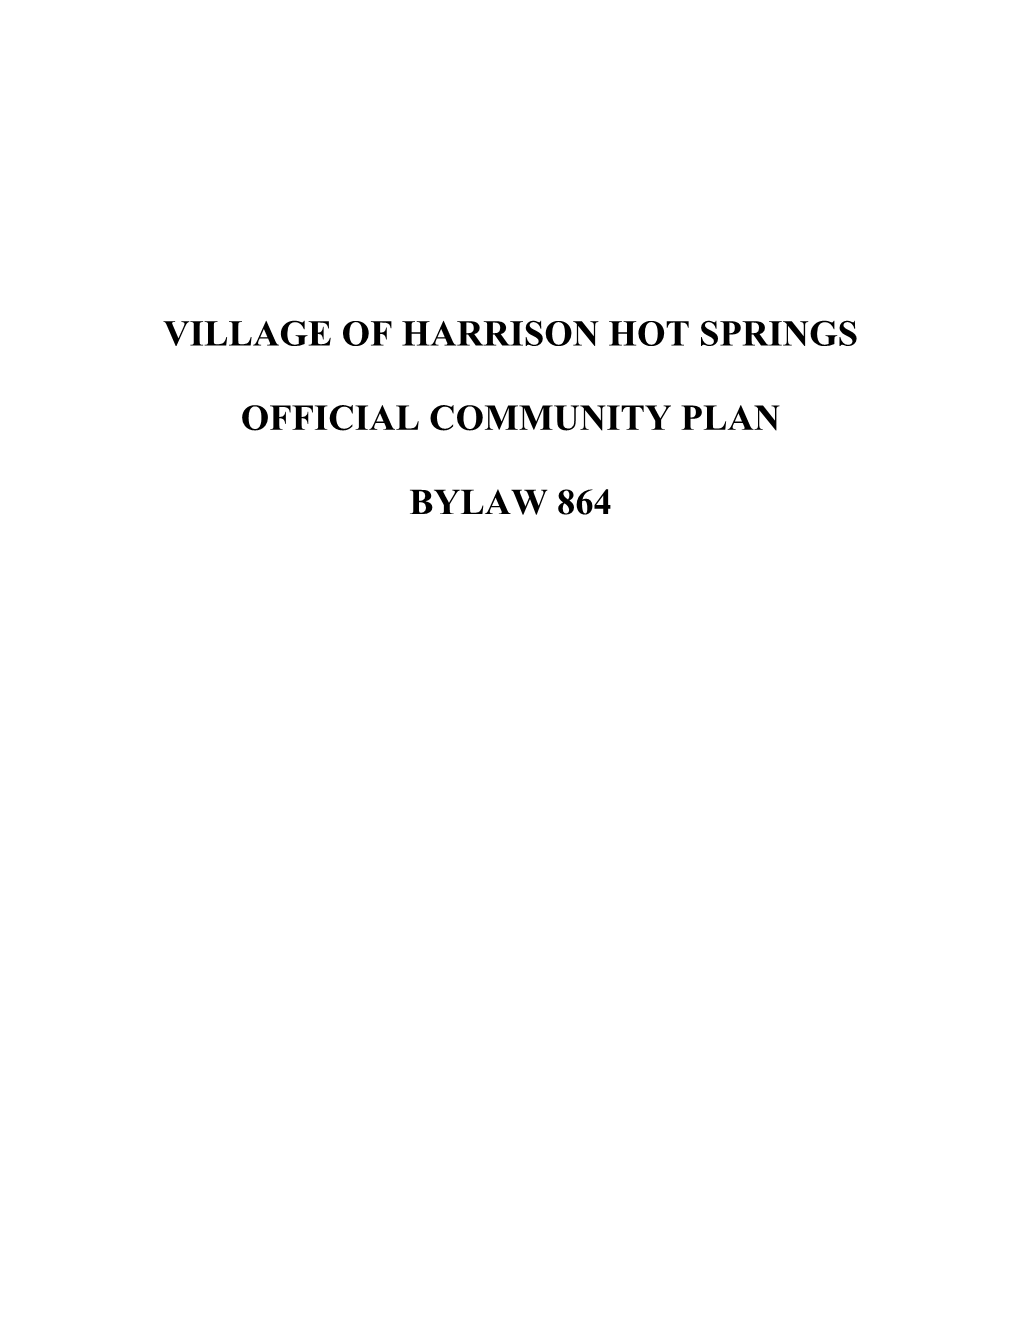 Village of Harrison Hot Springs Official Community Plan Bylaw No